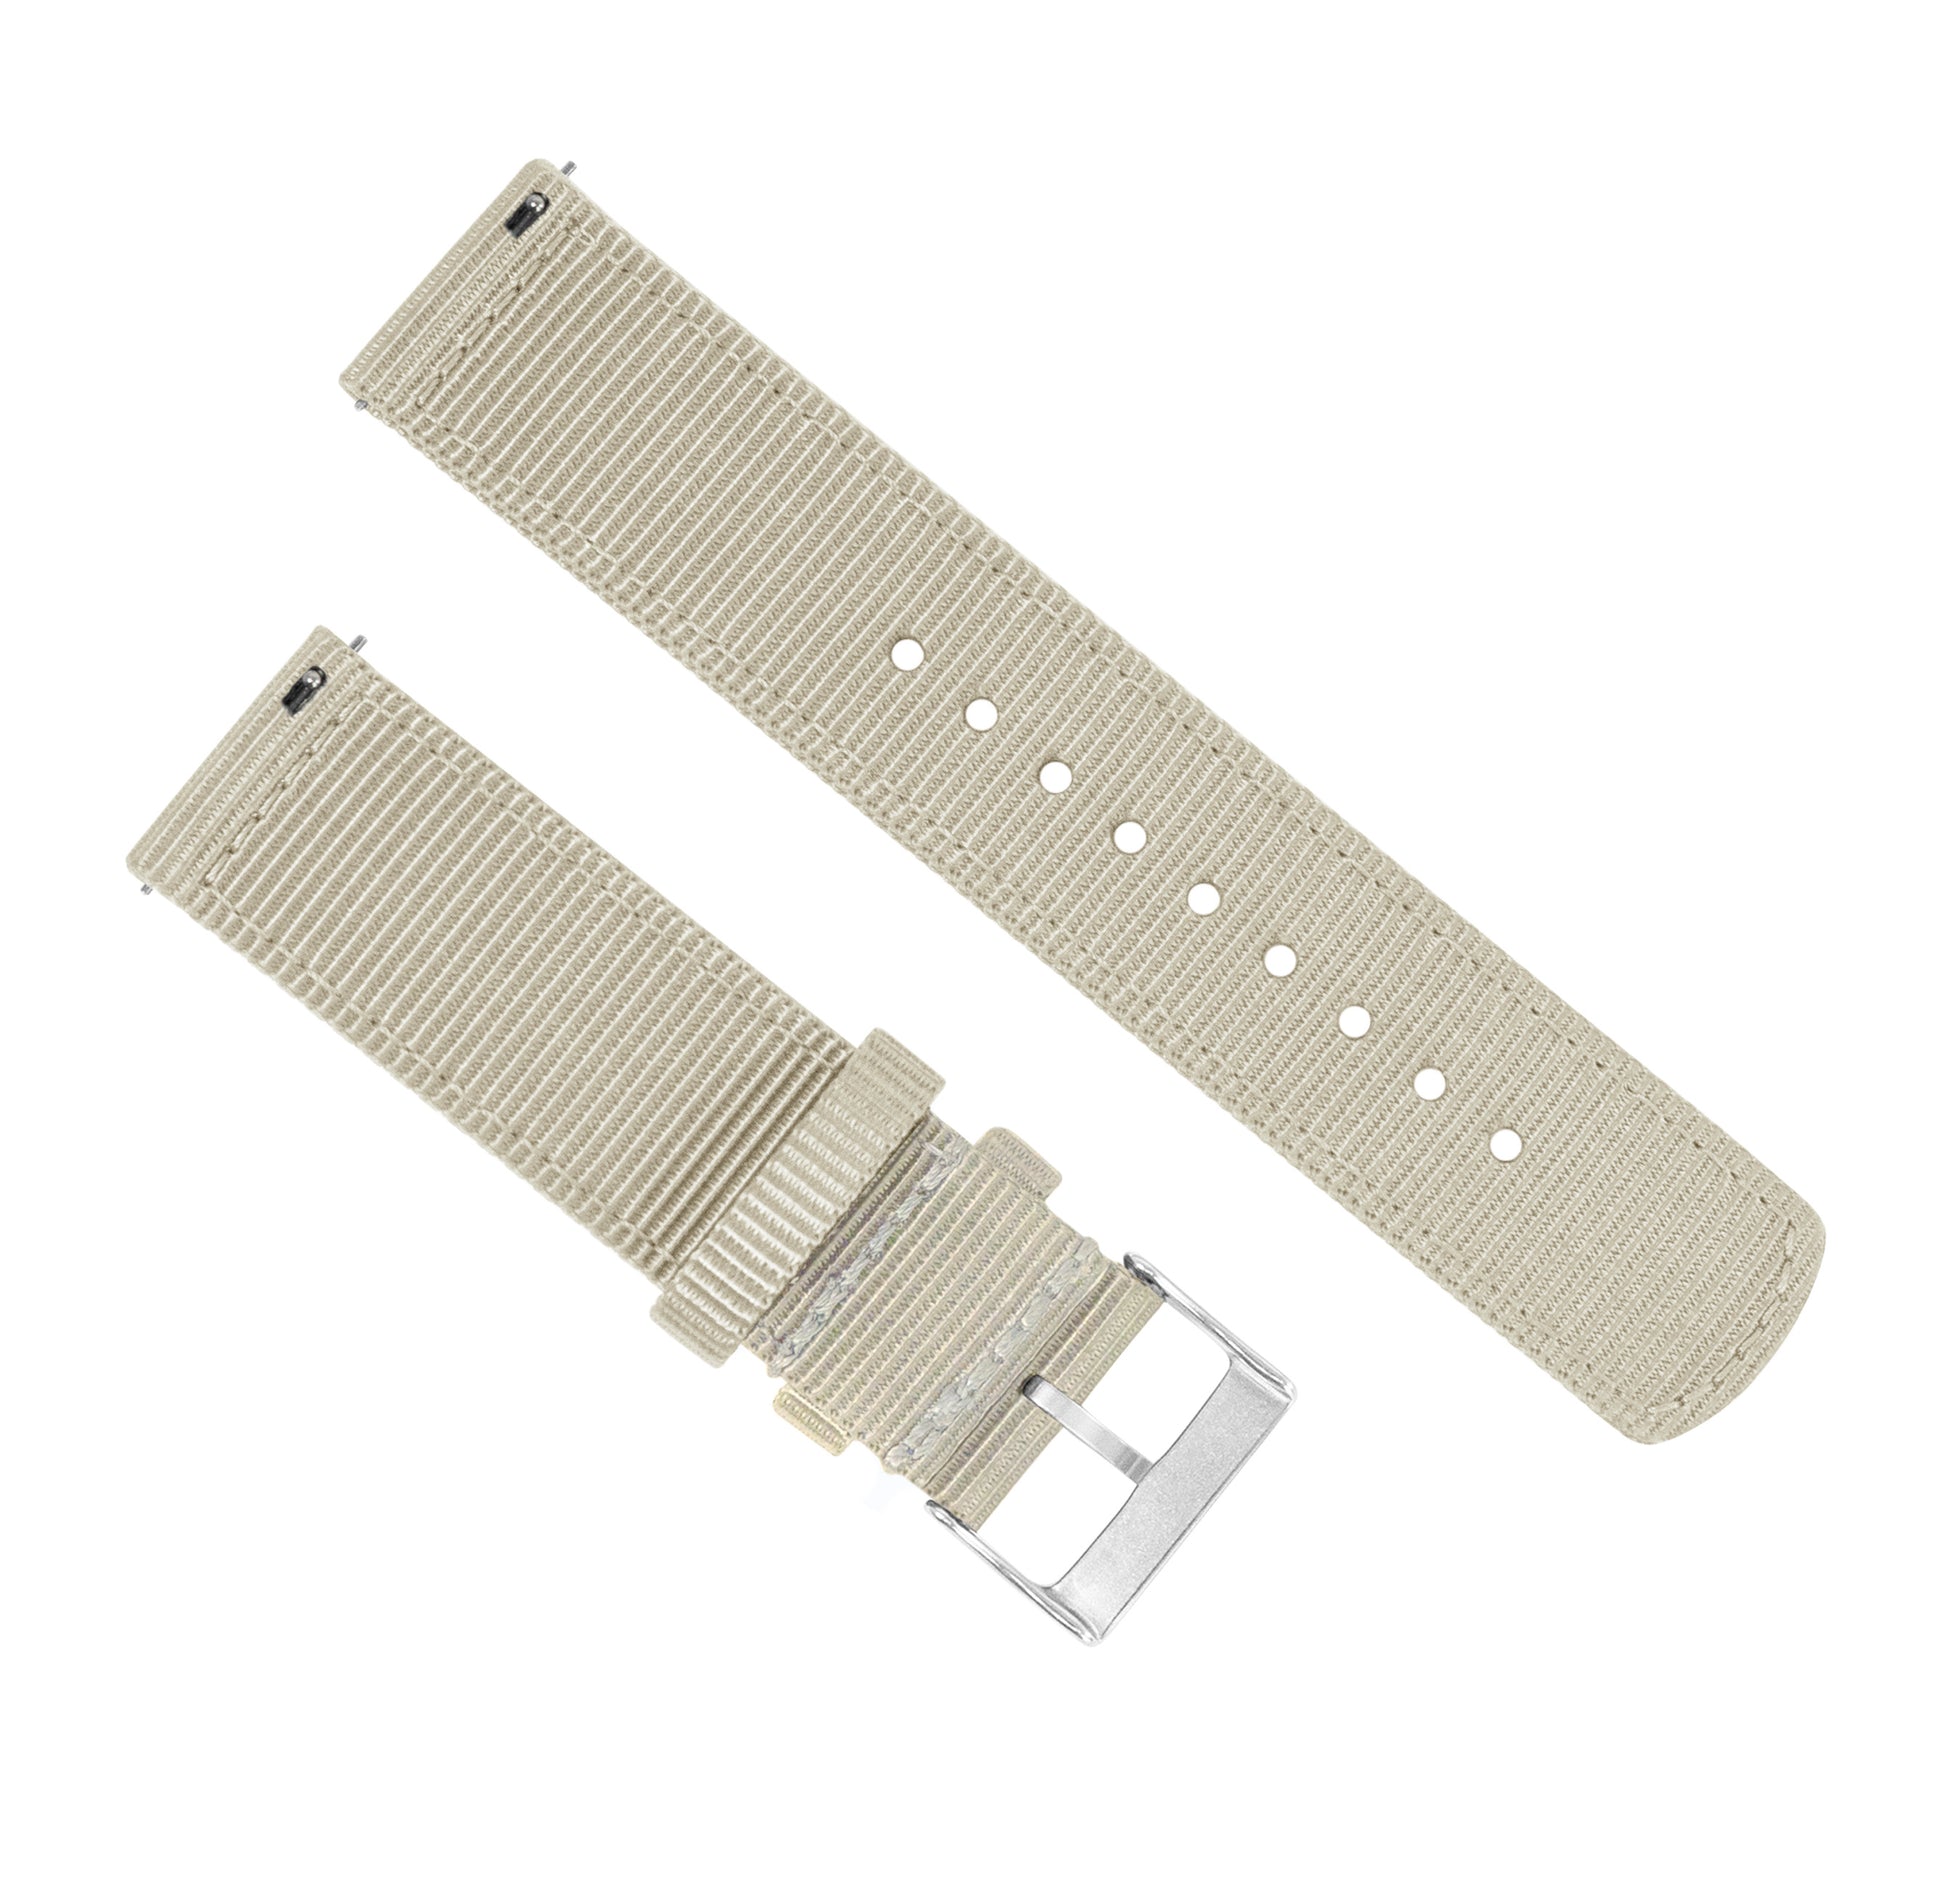 Withings Nokia Activité and Steel HR | Two-Piece NATO Style | Khaki Tan - Barton Watch Bands